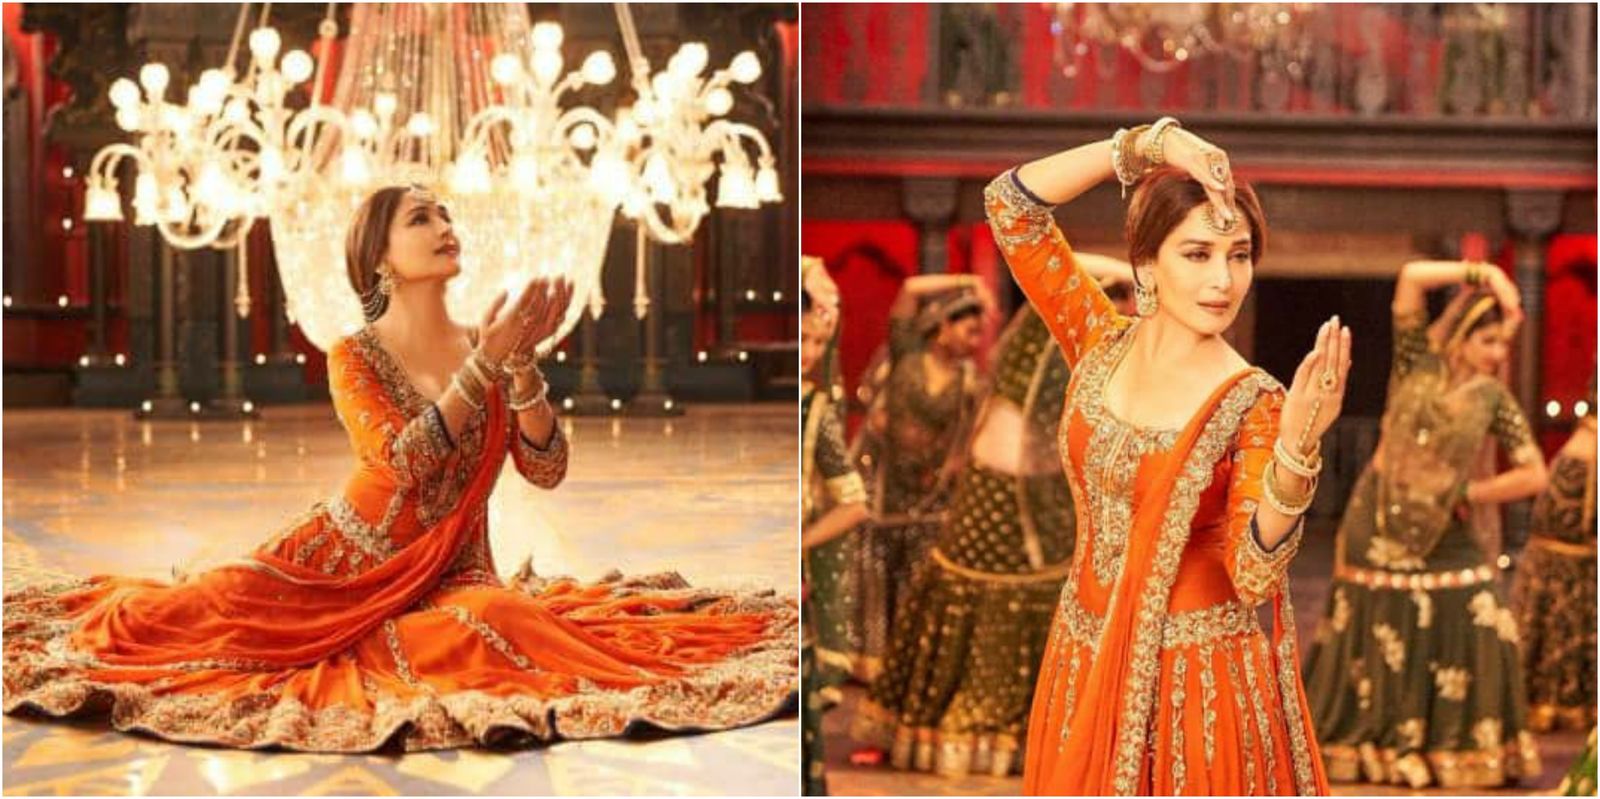 Tabah Ho Gaye: Even Madhuri’s Kathak Can’t Hide The Stale Devdas Hangover In The New Kalank Song